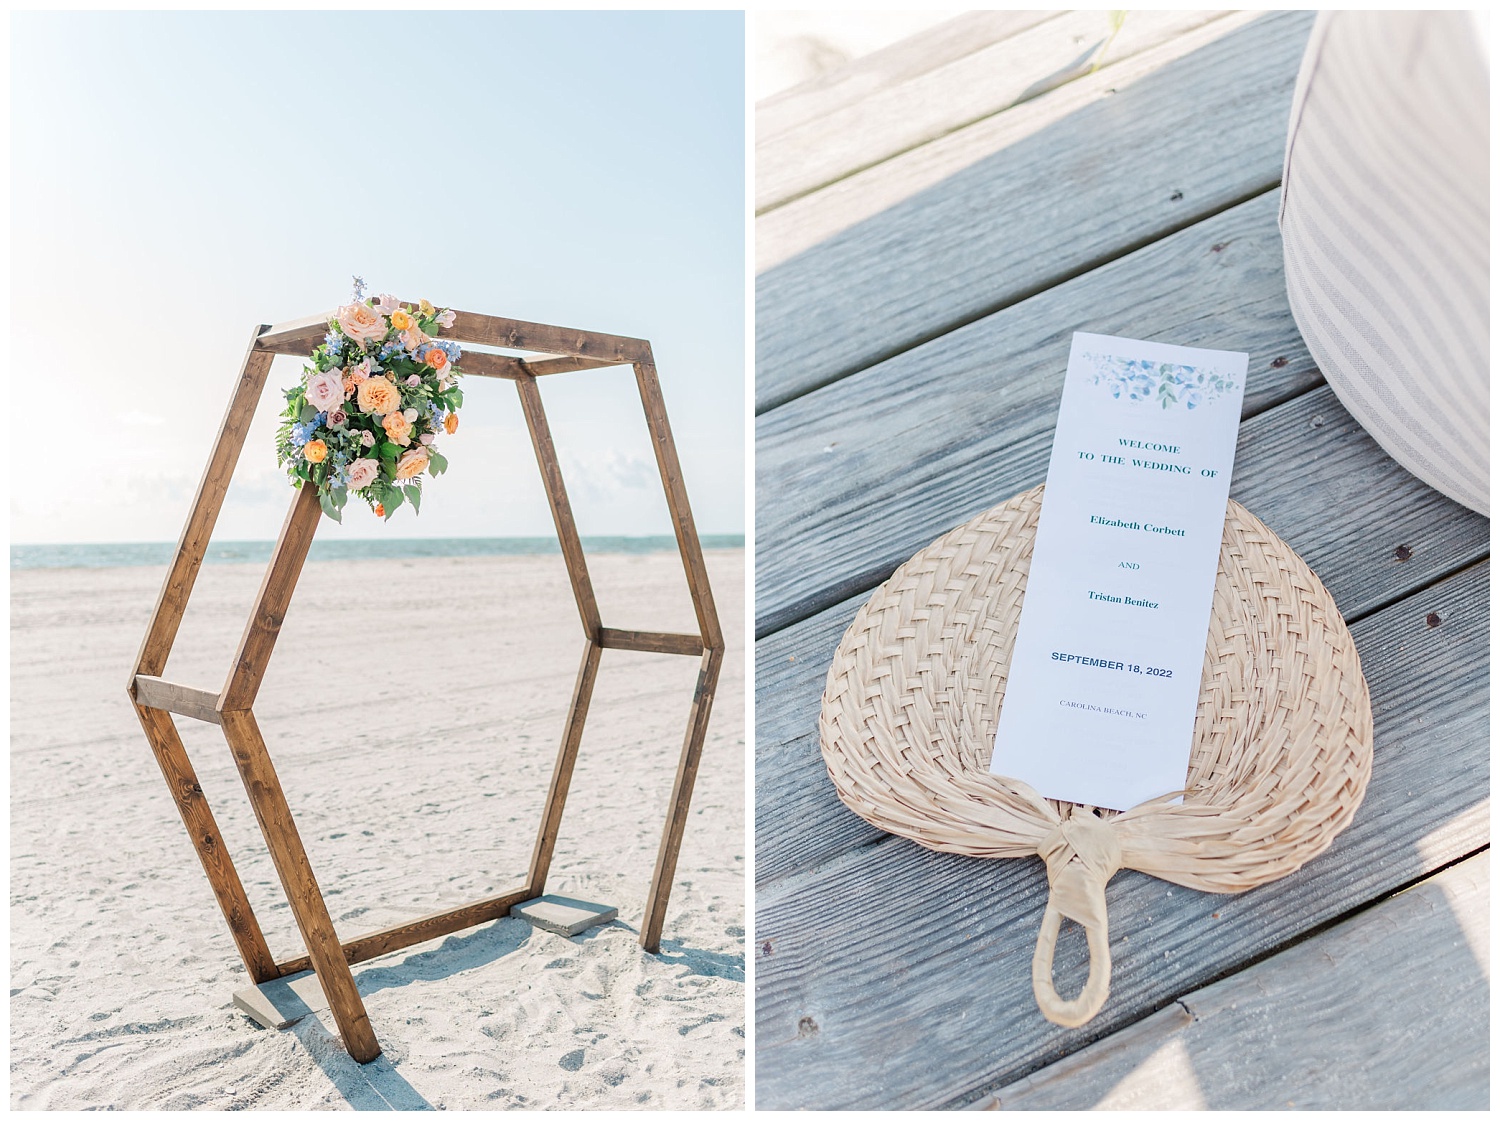 ceremony details and arch with flowers at beach wedding